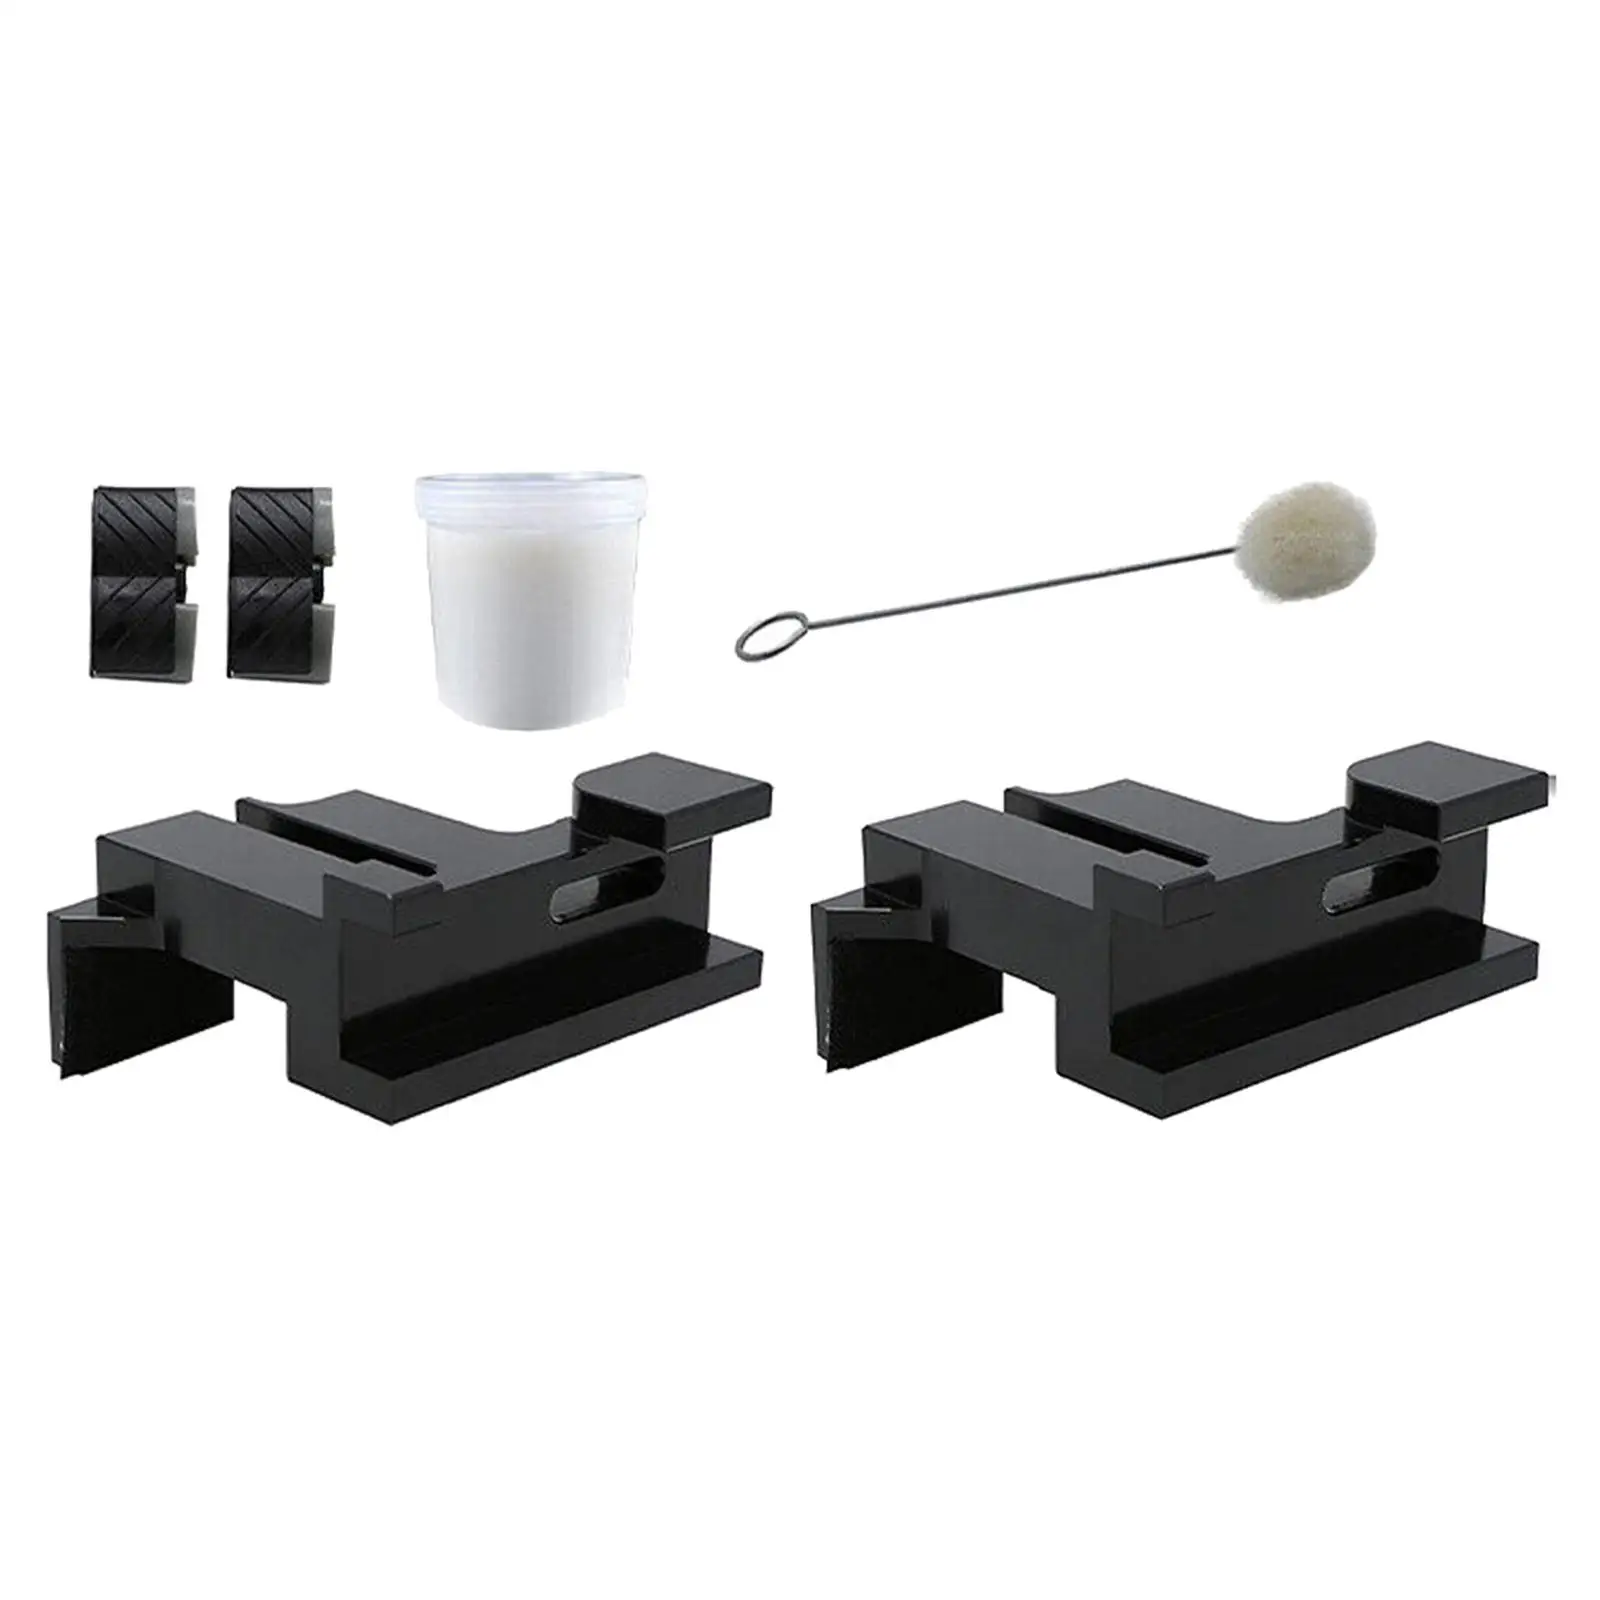 Sunroof Track Assembly Repair Set Easy to Install Sunroof Rails Repair Set Replaces Part for Lincoln Mkt (2010-2018)